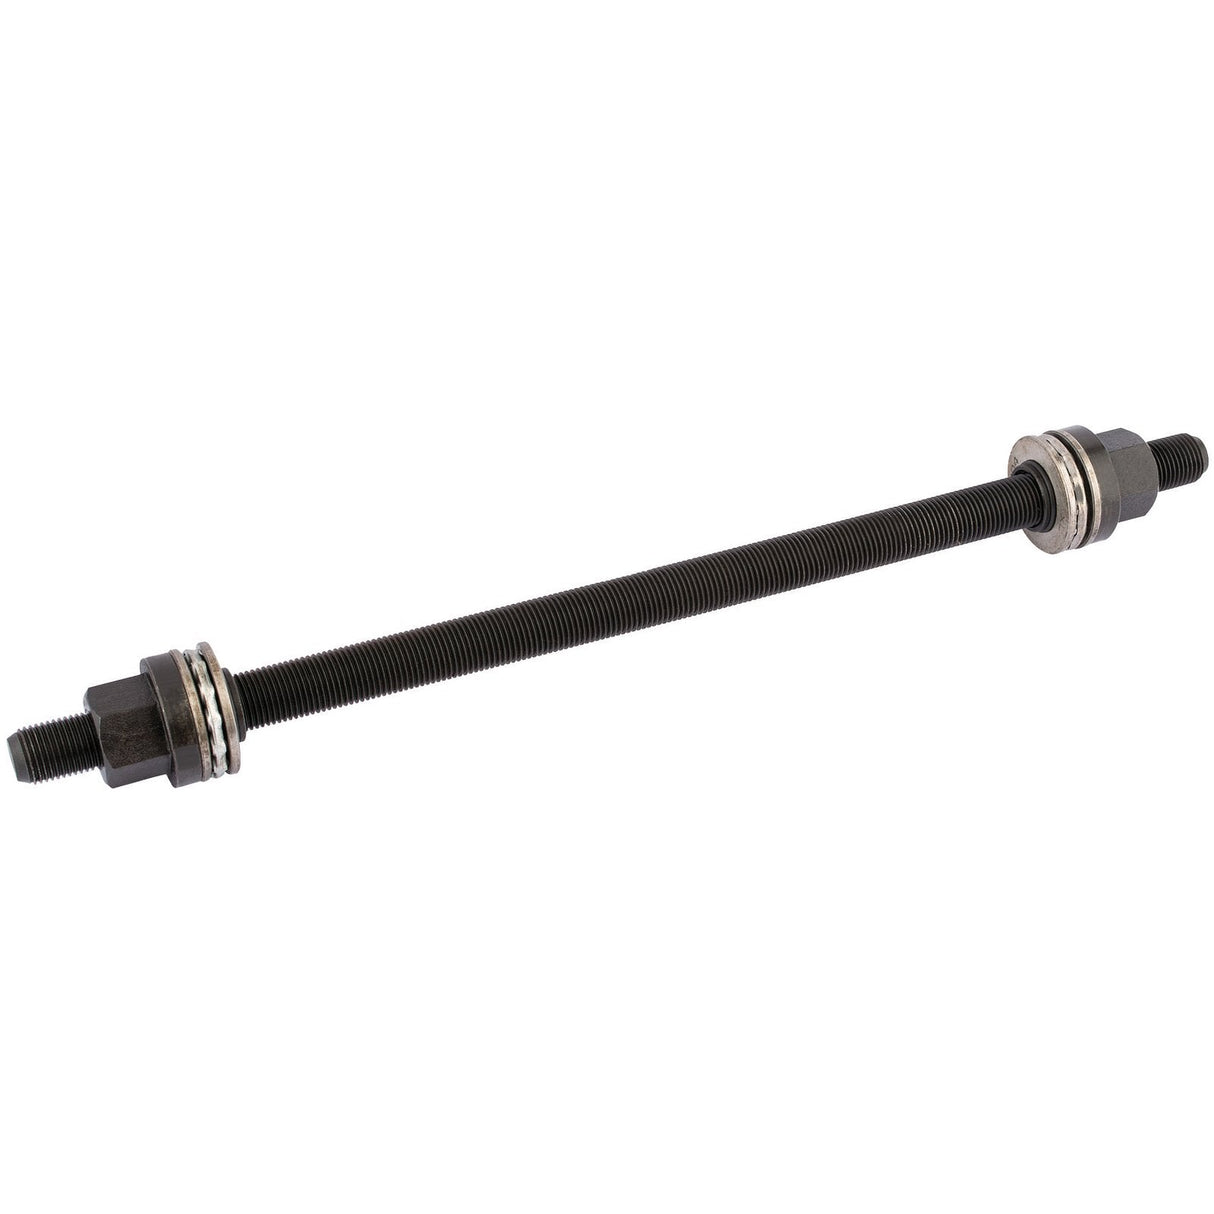 Draper M16 Spare Threaded Rod And Bearing For 59123 And 30816 Extraction Kit - YBPK27 - Farming Parts